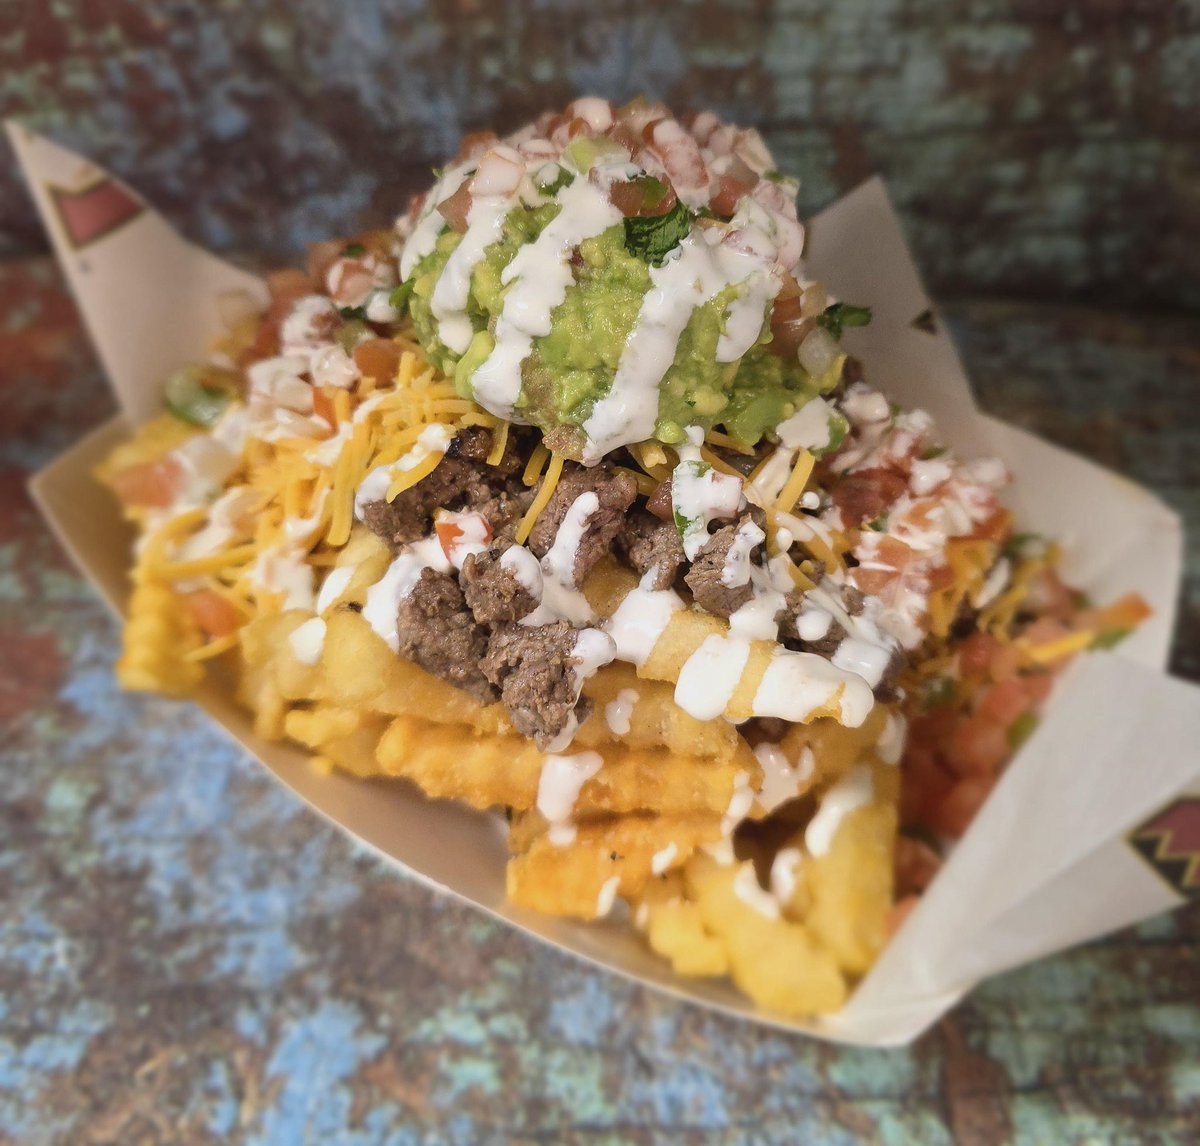 Celebrate Mexican Heritage Night with the @Dbacks tonight and don’t miss out on our specialty food item, the Carne Asada Fries! 🇲🇽 You can find these at Taste of Chase by Section 130.